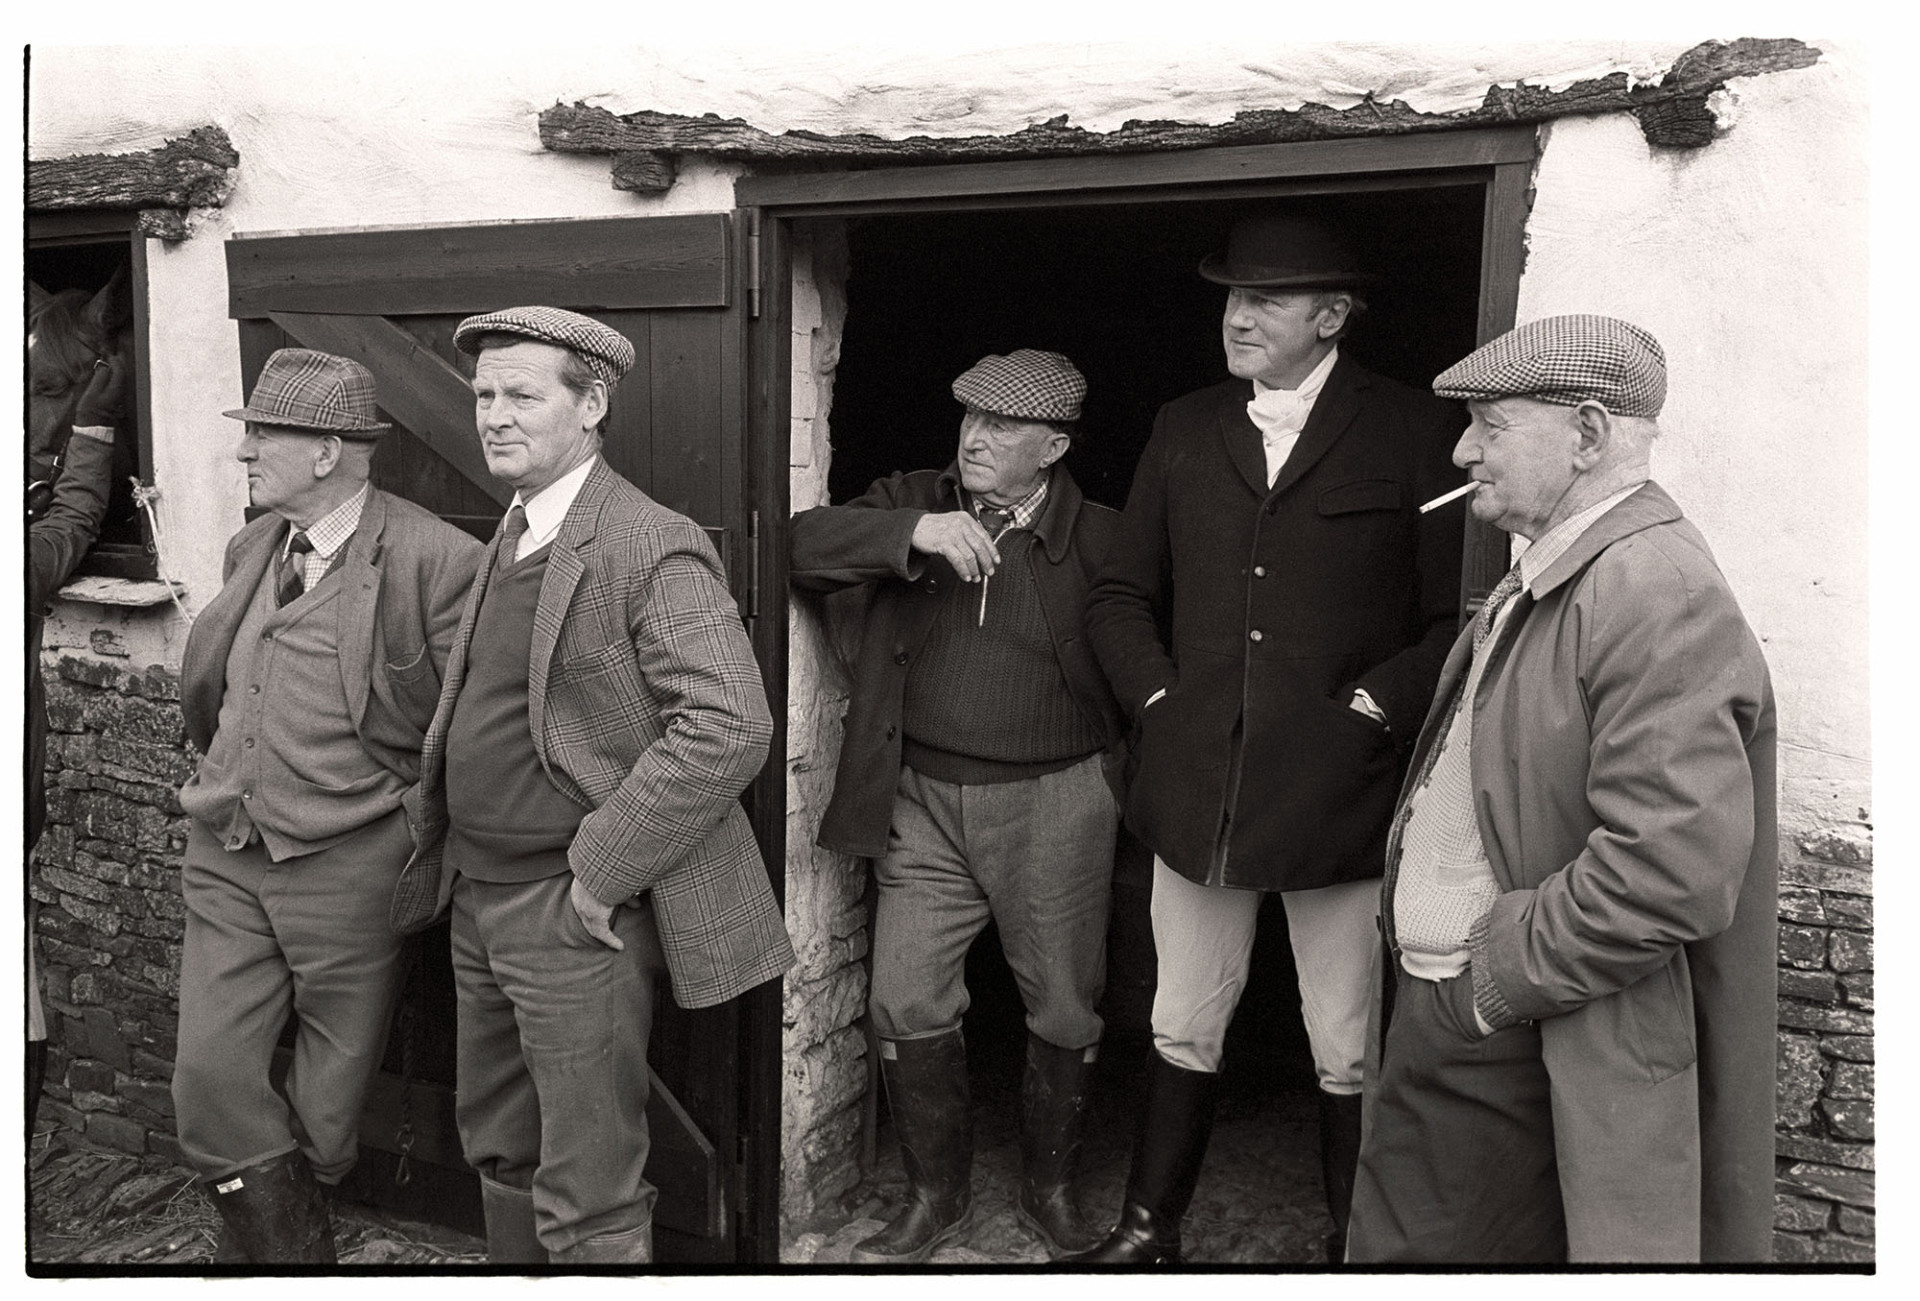 Hunt meet at house, followers and rider standing looking at meet, hunting clothes. 
[Five men stood around a doorway at a hunt meet at Hackwells, Dolton. One of the men is smoking a cigarette and another is dressed in riding or hunting clothes.]